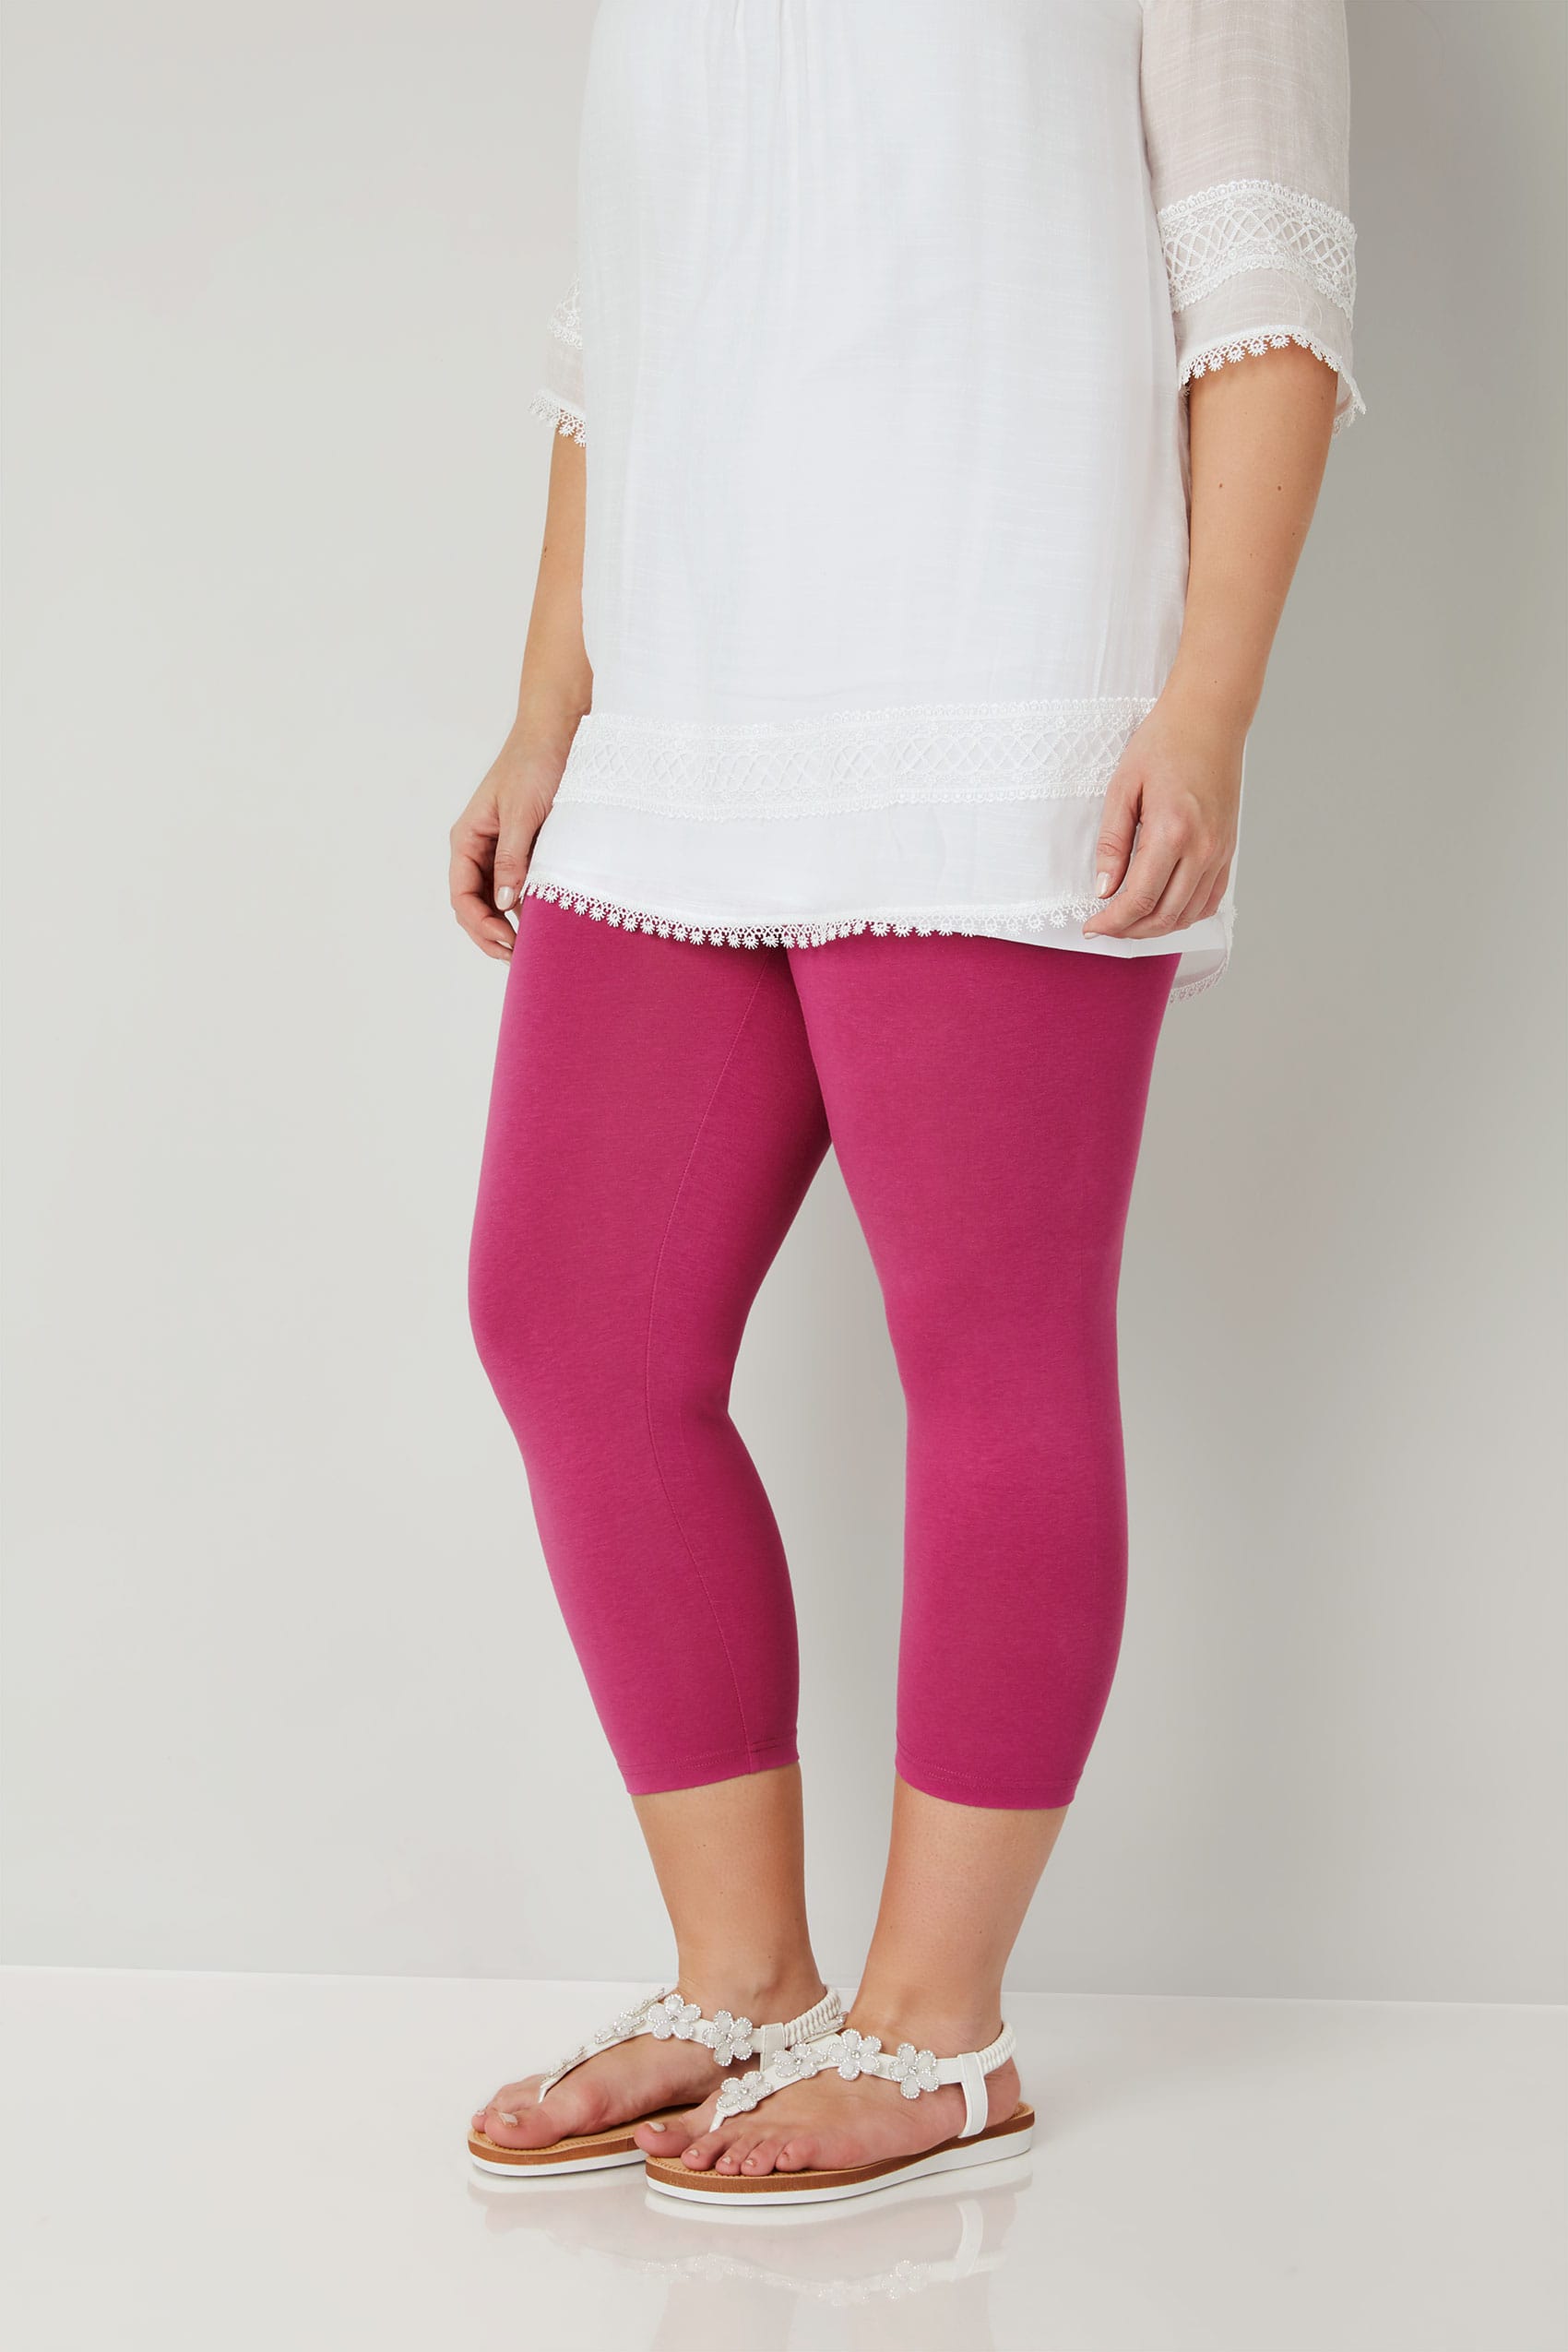 Dark Pink Cotton Essential Cropped Leggings, plus size 16 to 36